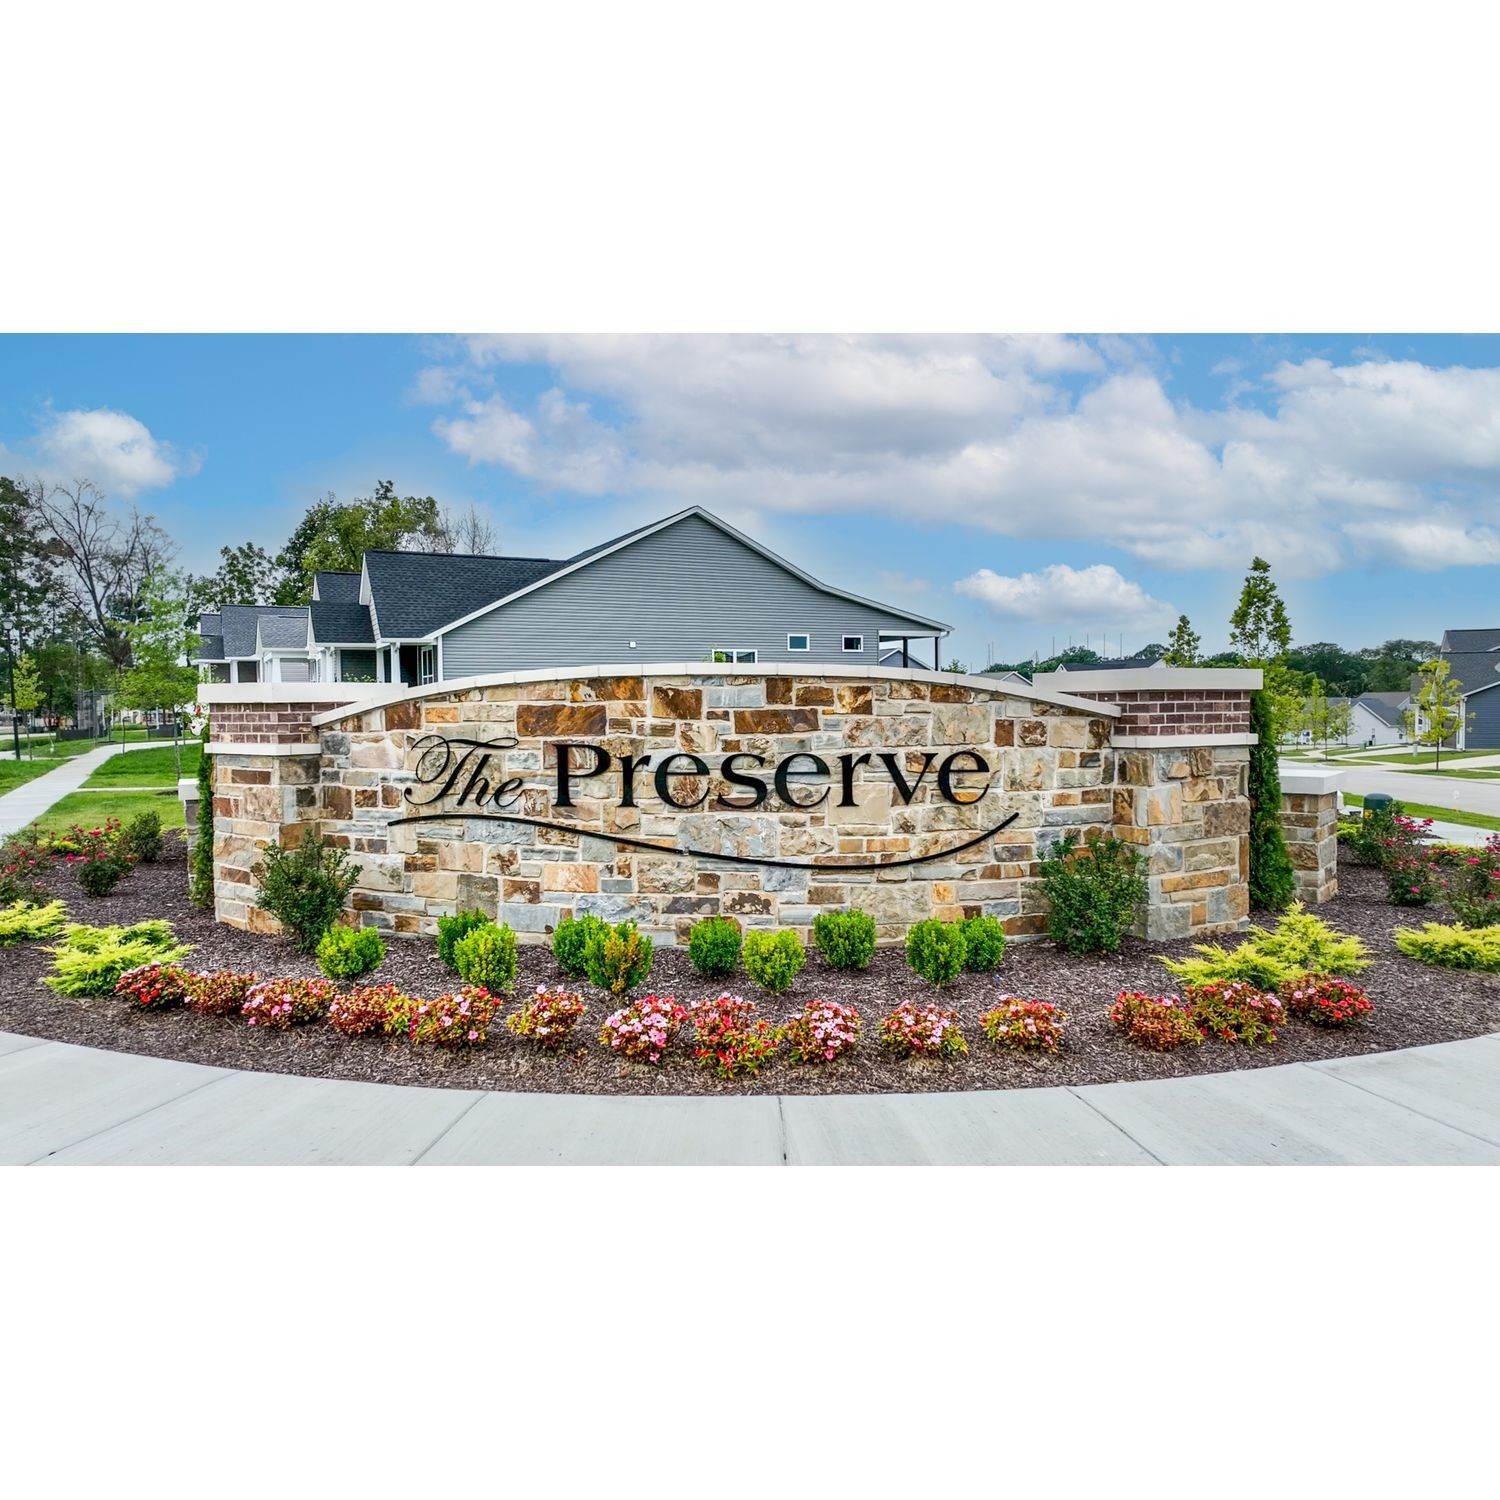 4. The Preserve byggnad vid 6704 Preservation Parkway, St. Louis, MO 63123